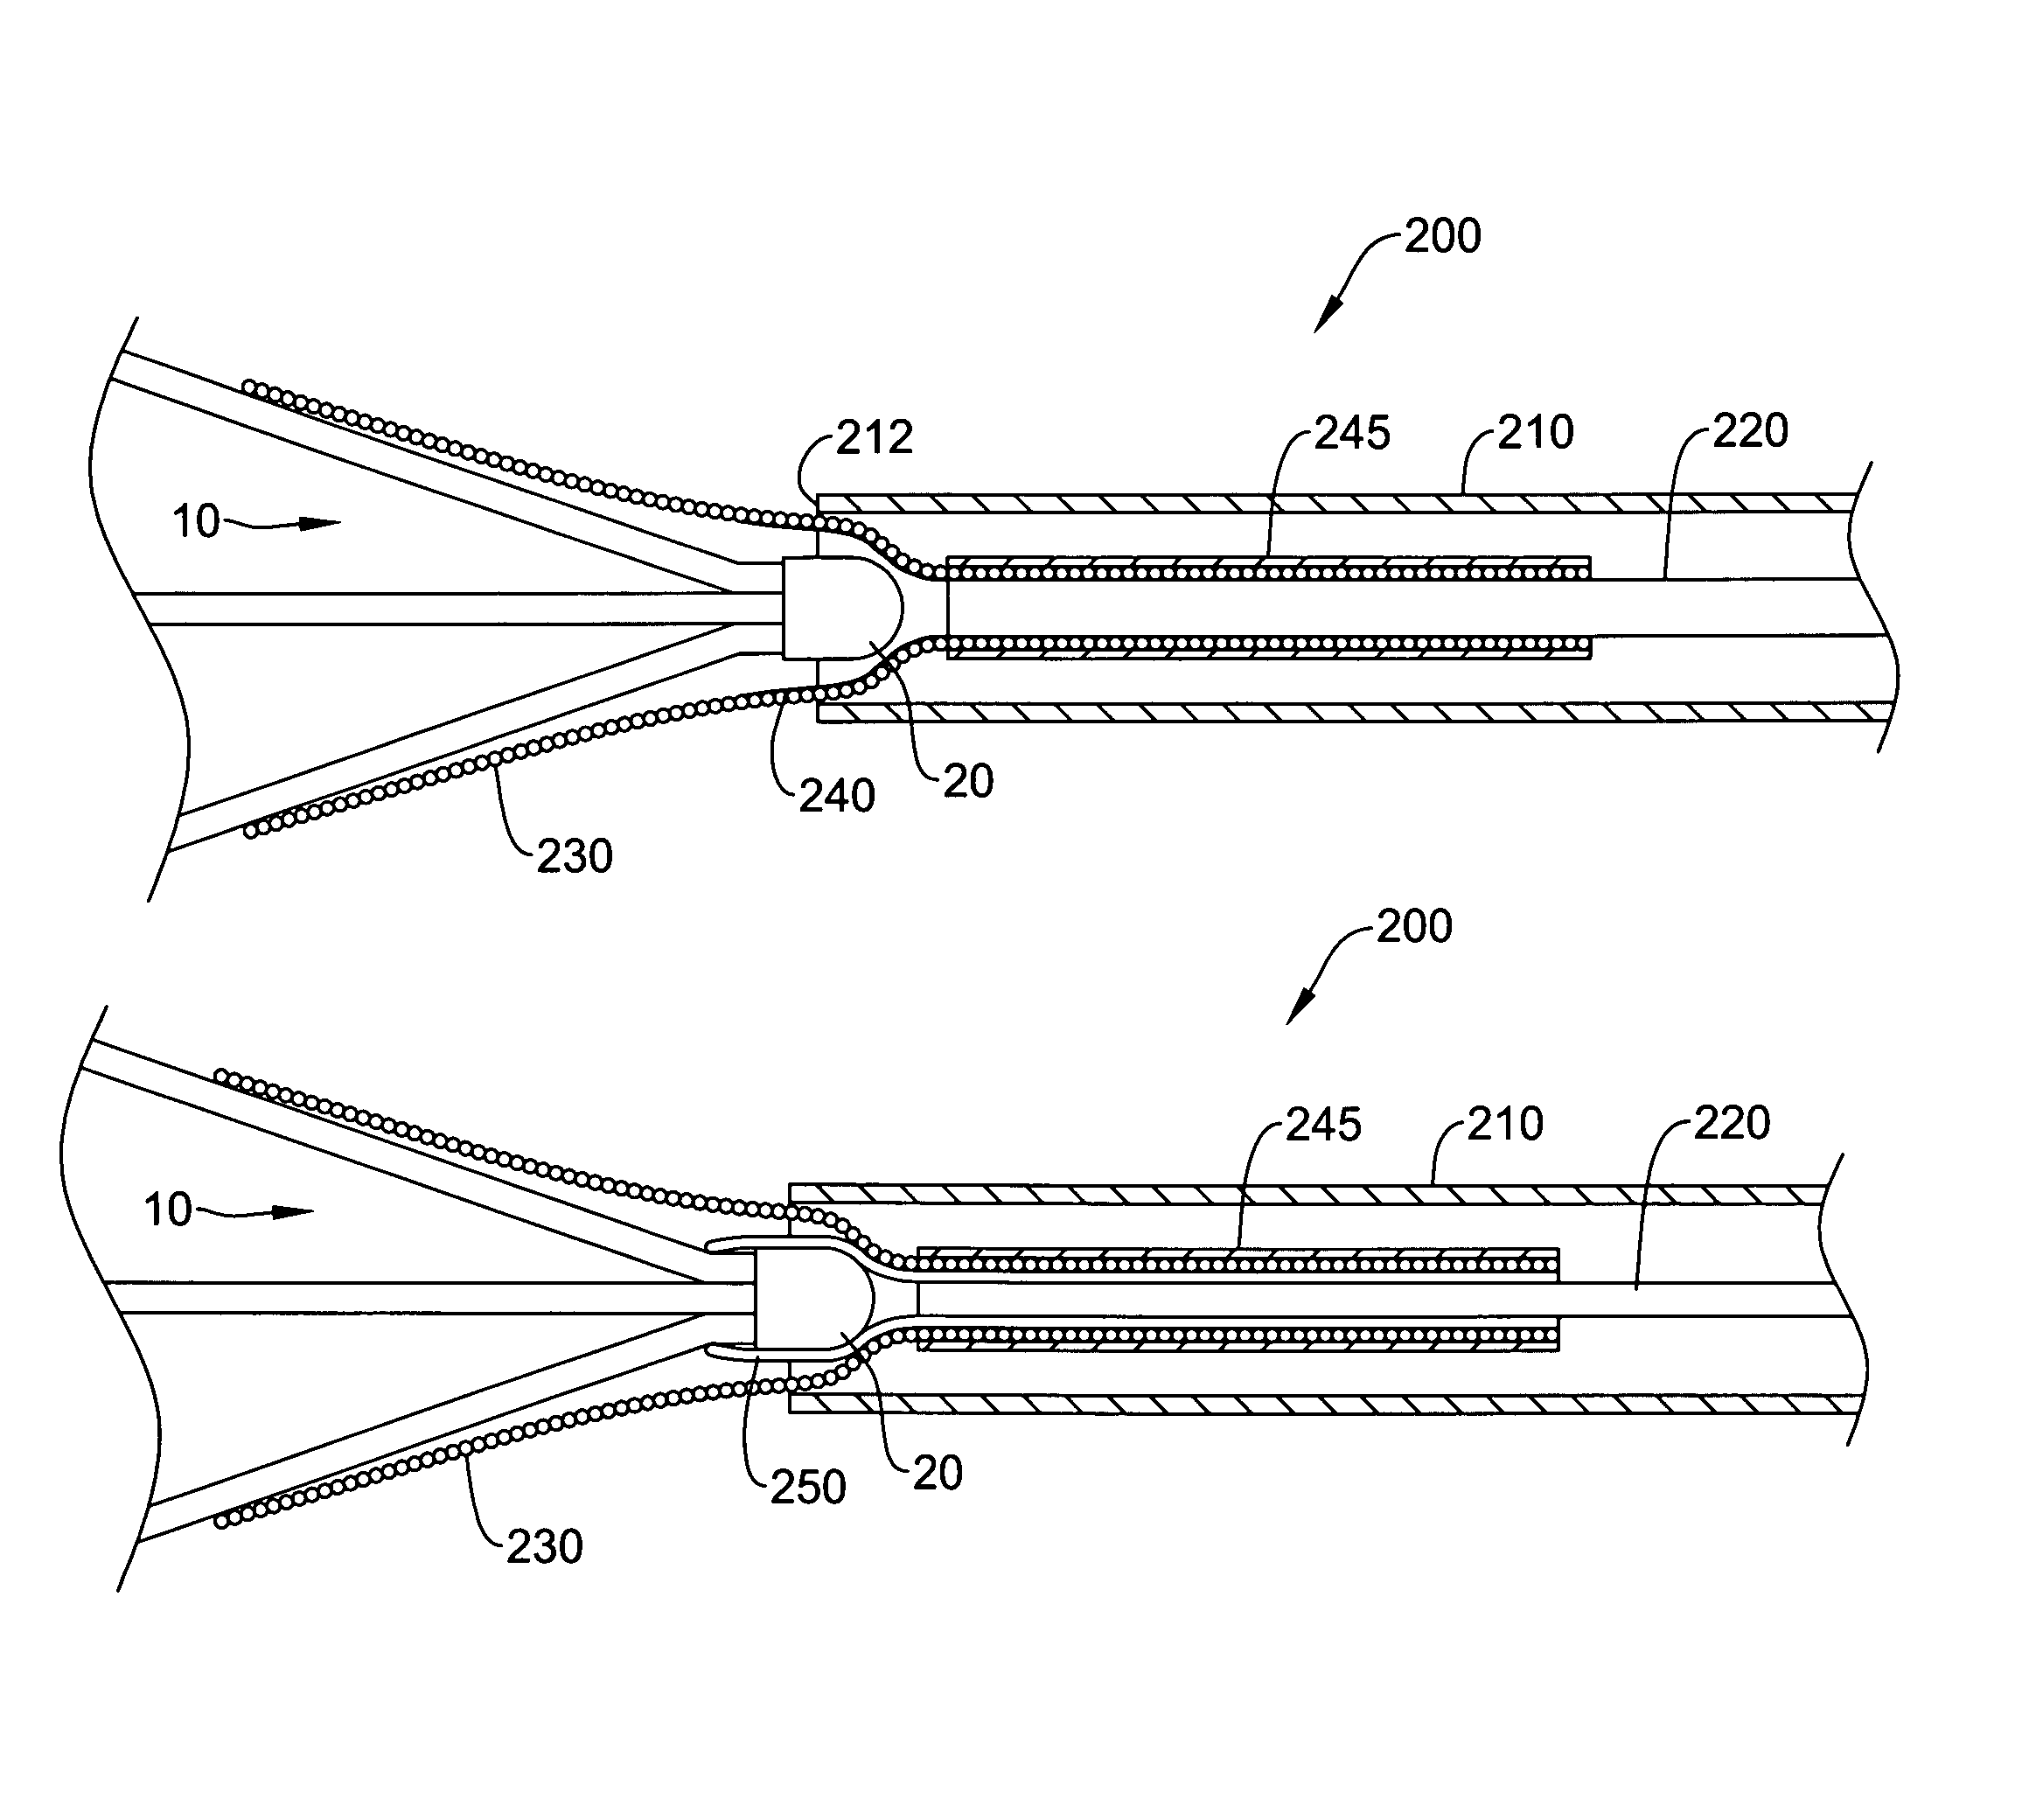 Filter with positioning and retrieval devices and methods